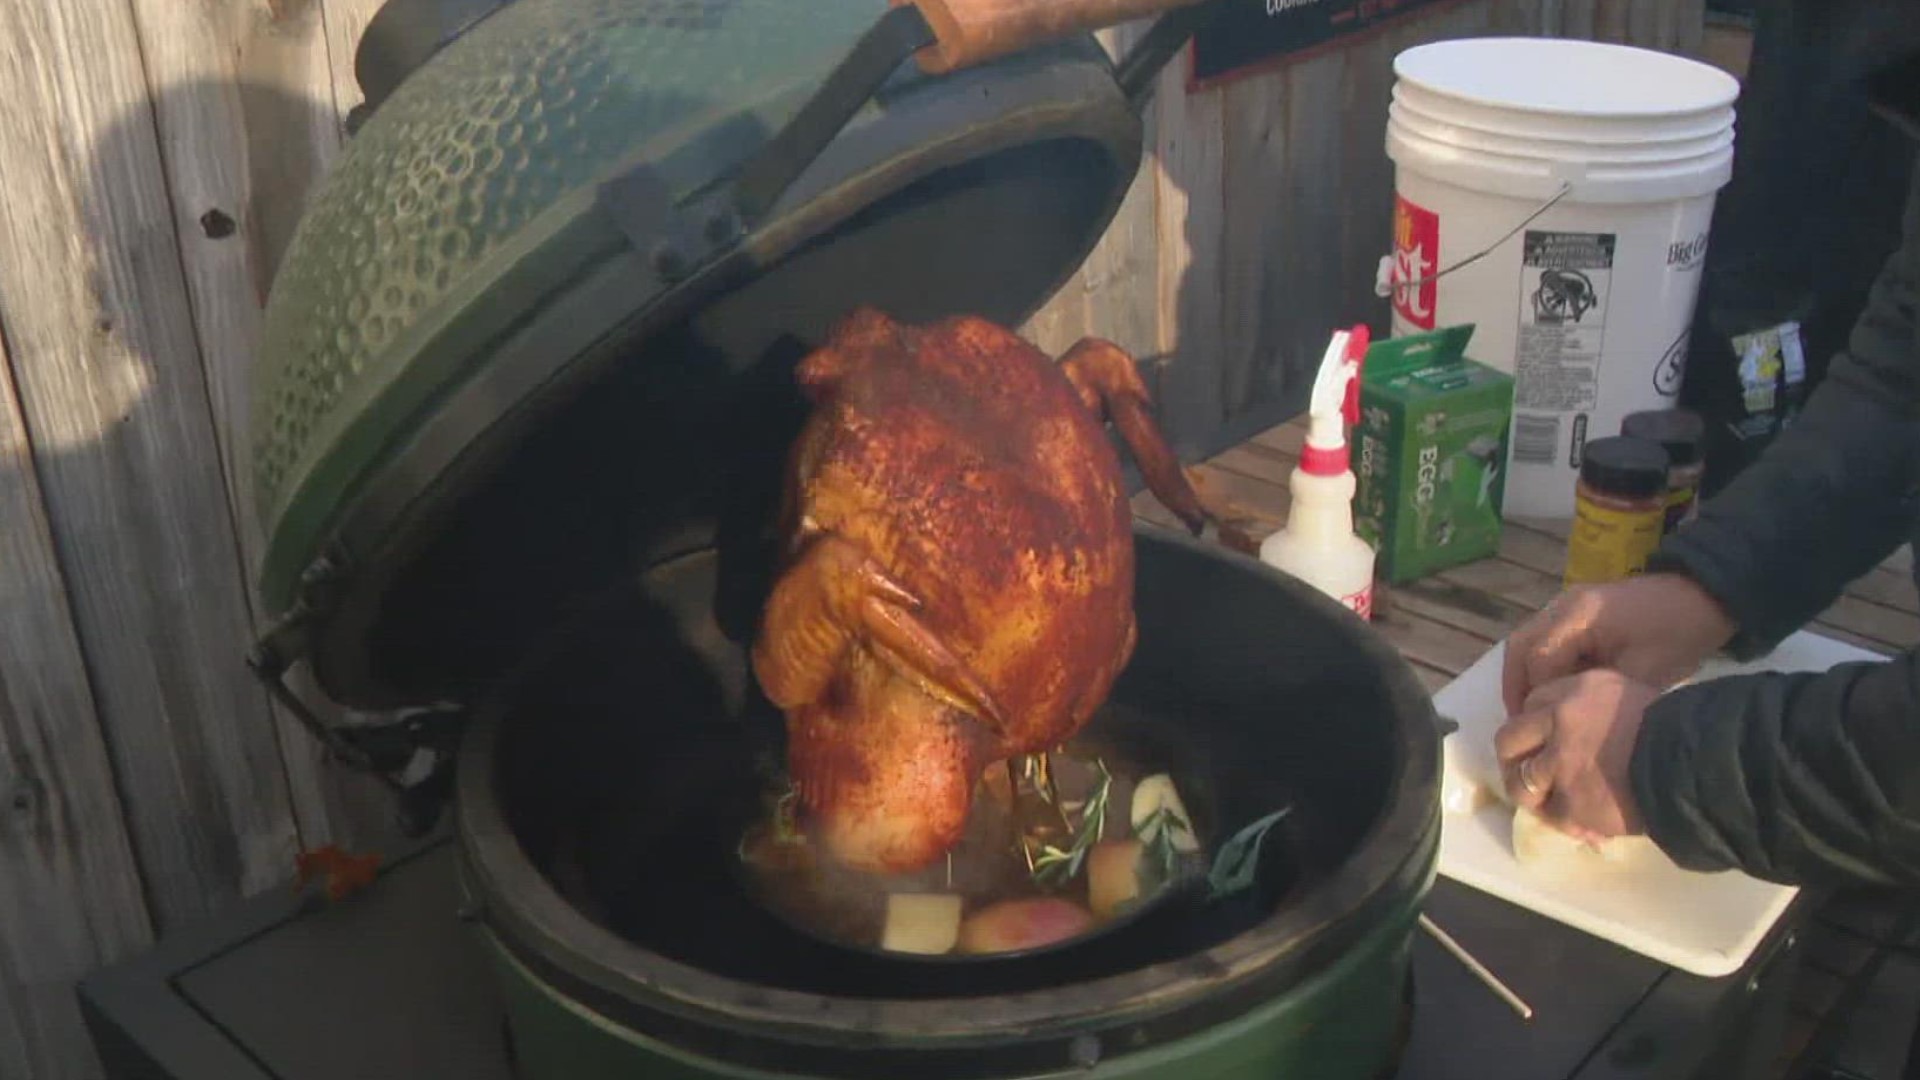 Cooking turkeys outside continues to gain popularity, but requires some preparations. Pat Sullivan shows you how.